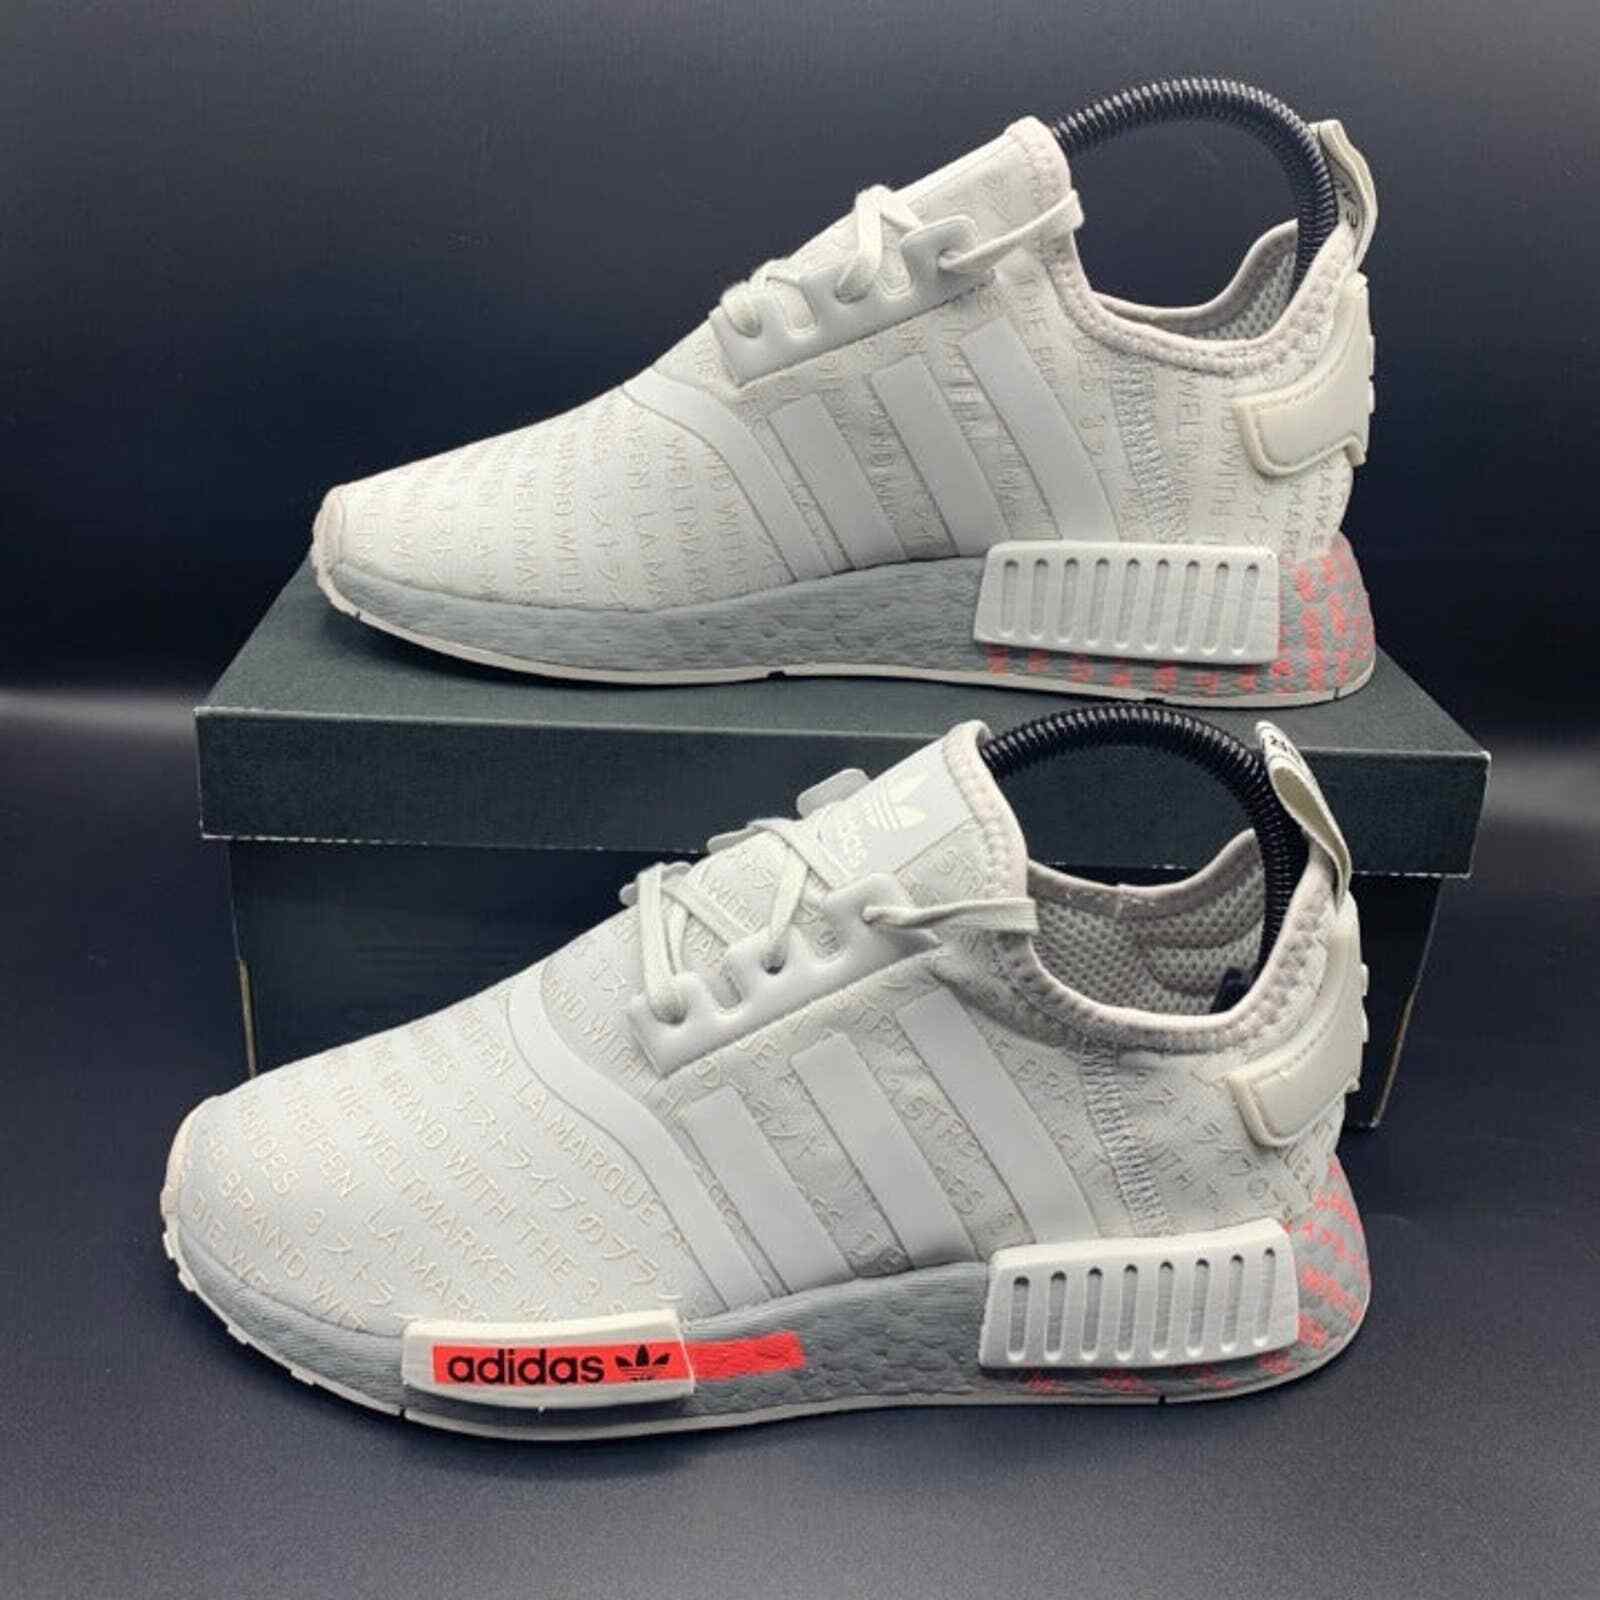 NEW Adidas NMD R1 Sneakers Size 5.5Y/7 Women's Shoes Athletic Running Grey